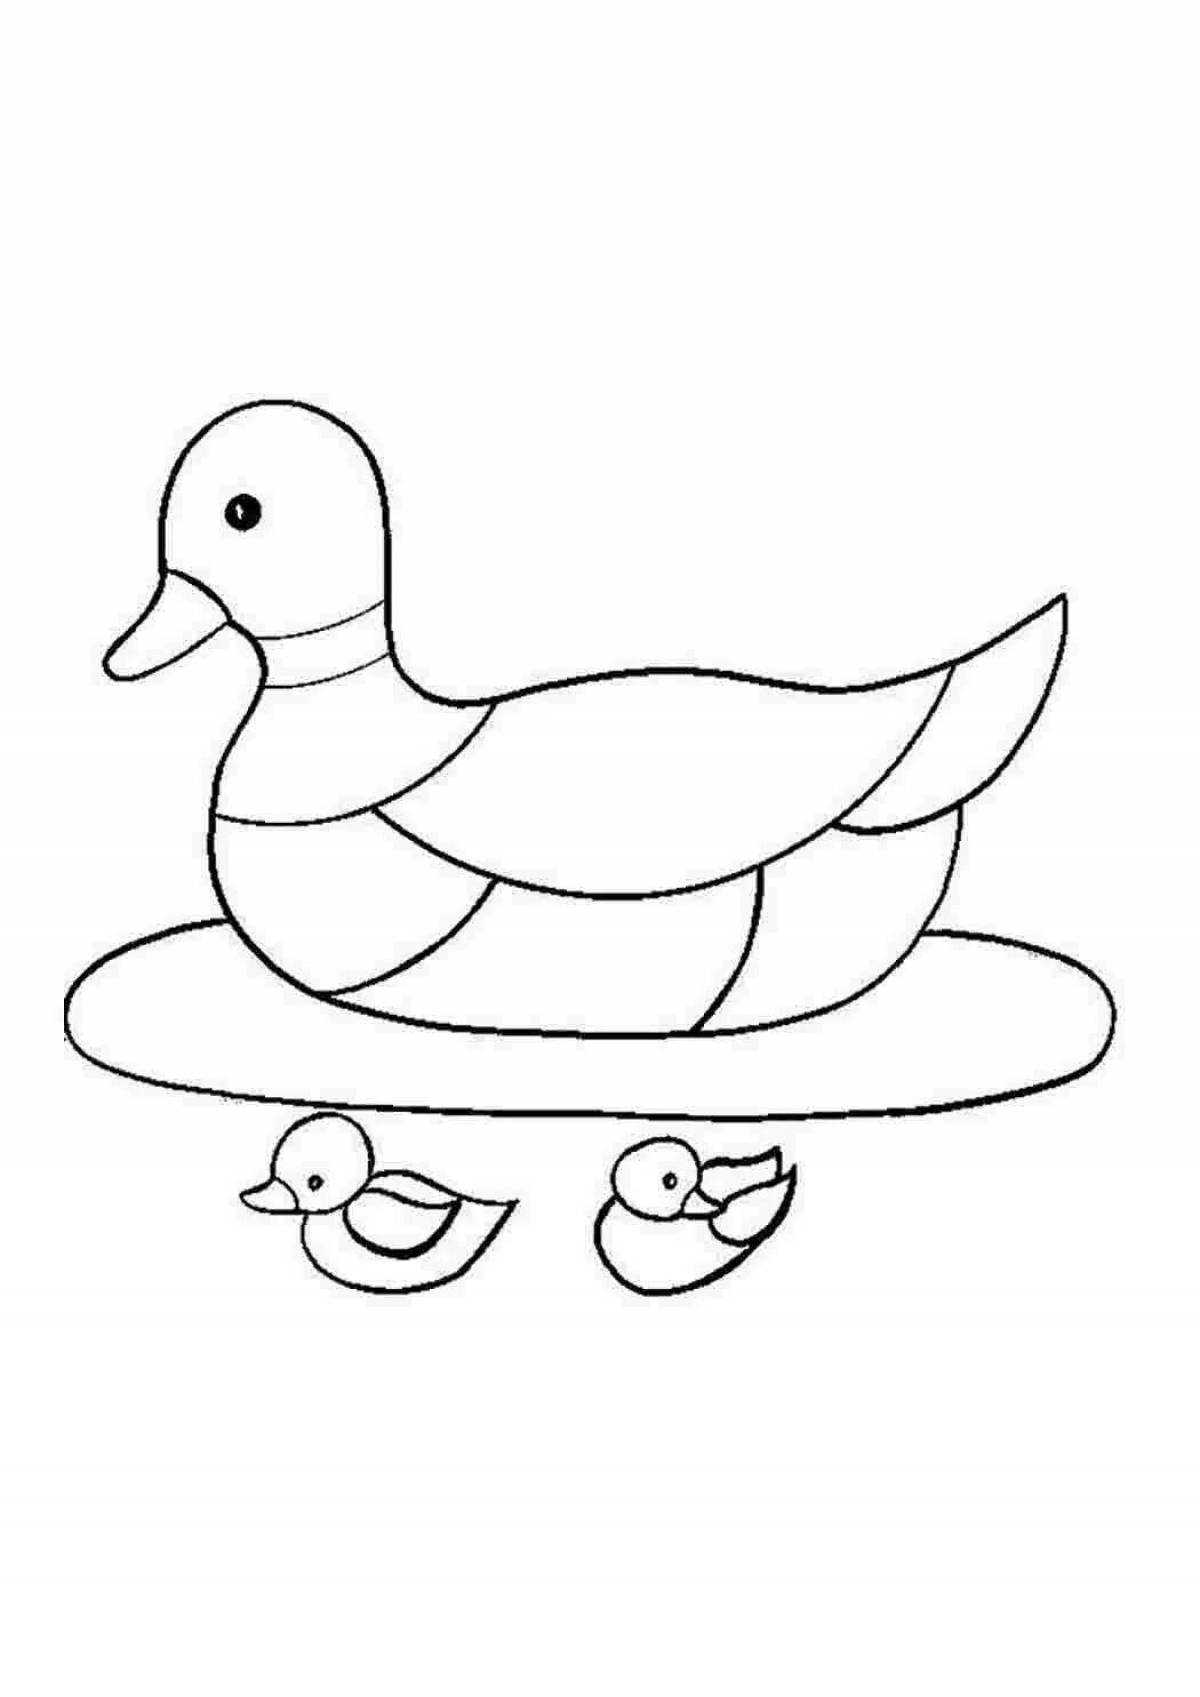 Cute duck coloring pages for kids